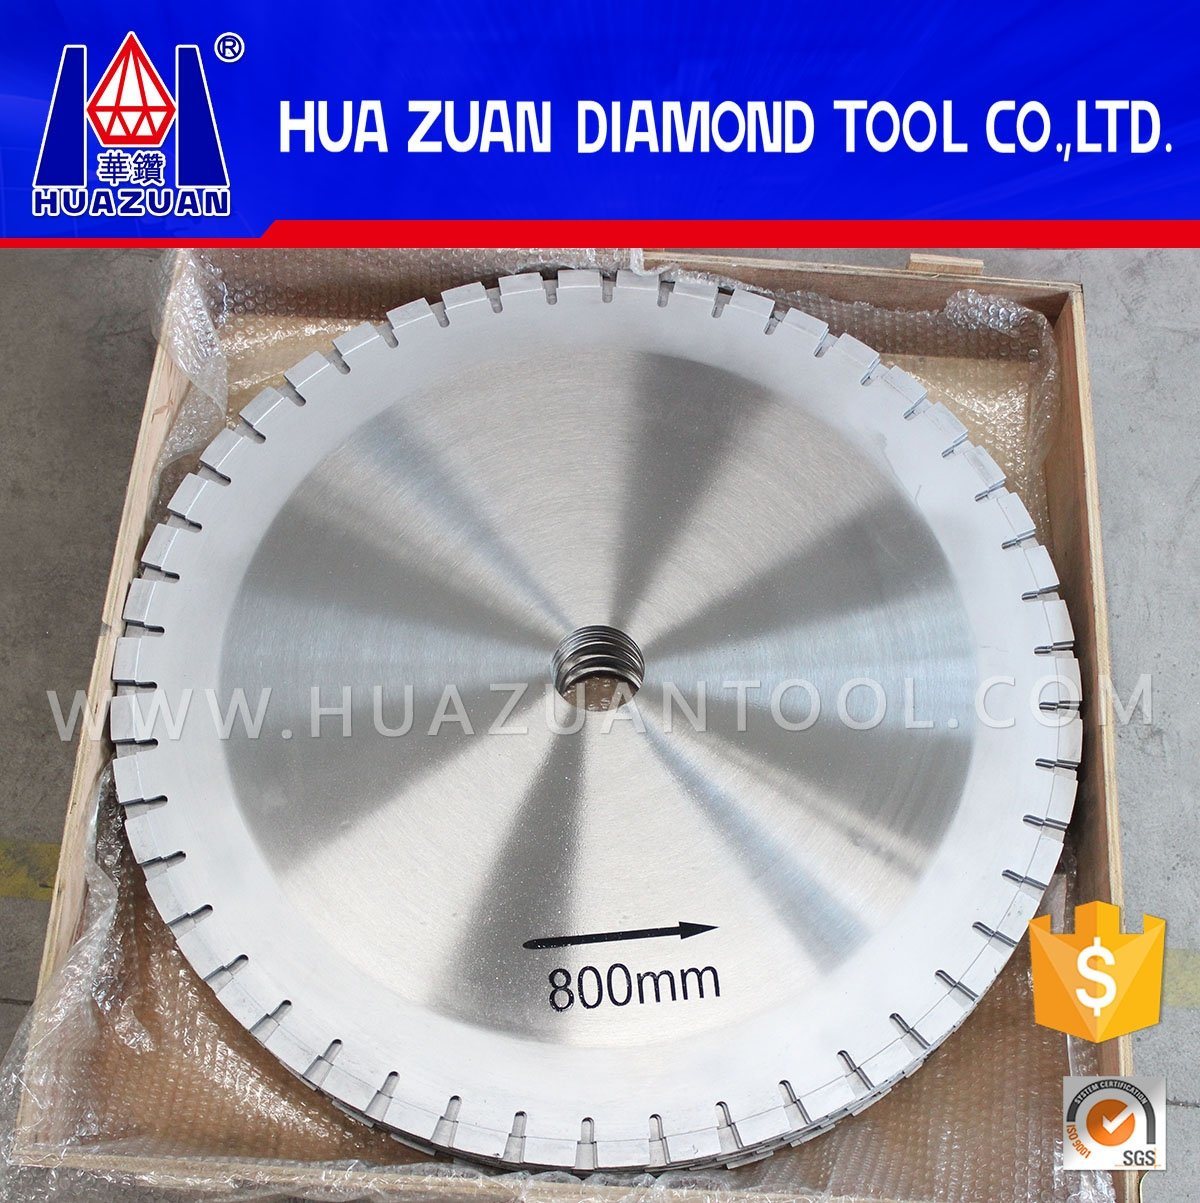 2017 New High Speed Normal/Silent Saw Blade for Granite Stone